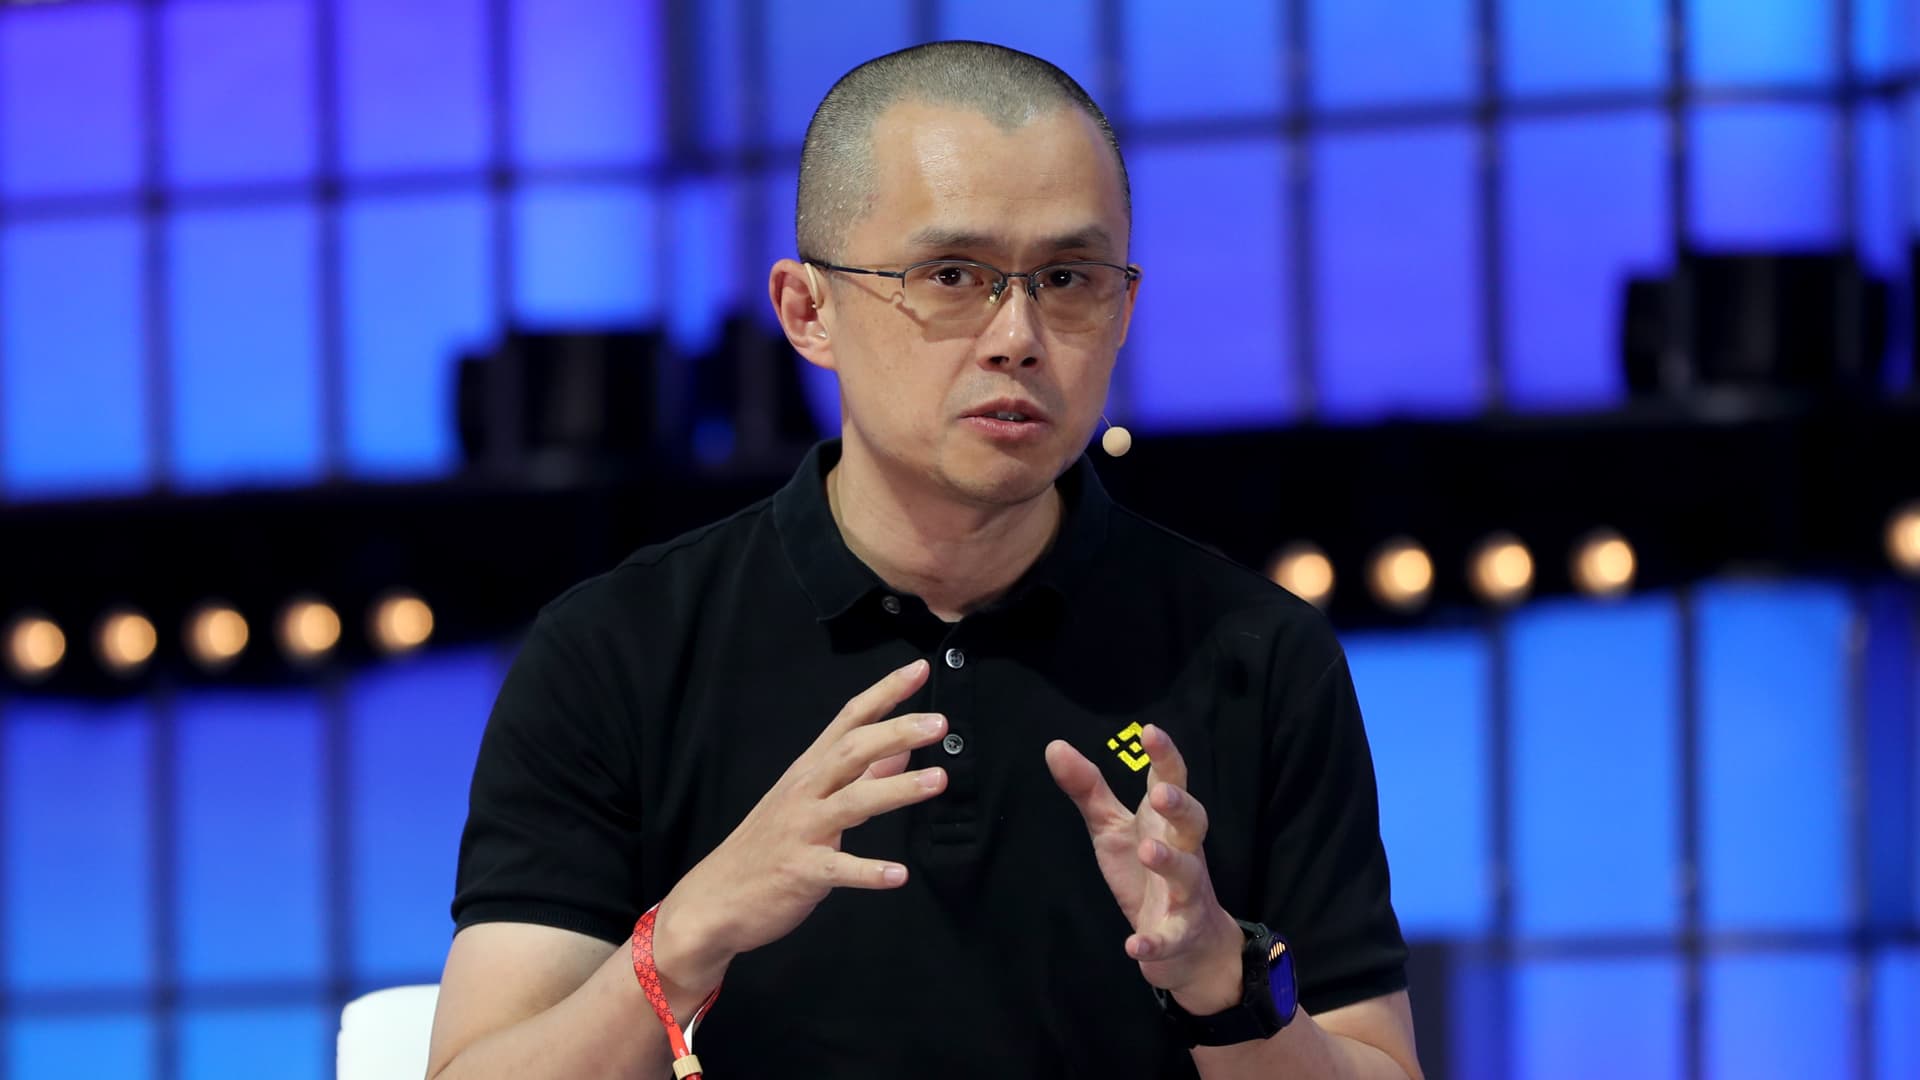 Binance warned VIP customers about law enforcement investigations, Treasury says